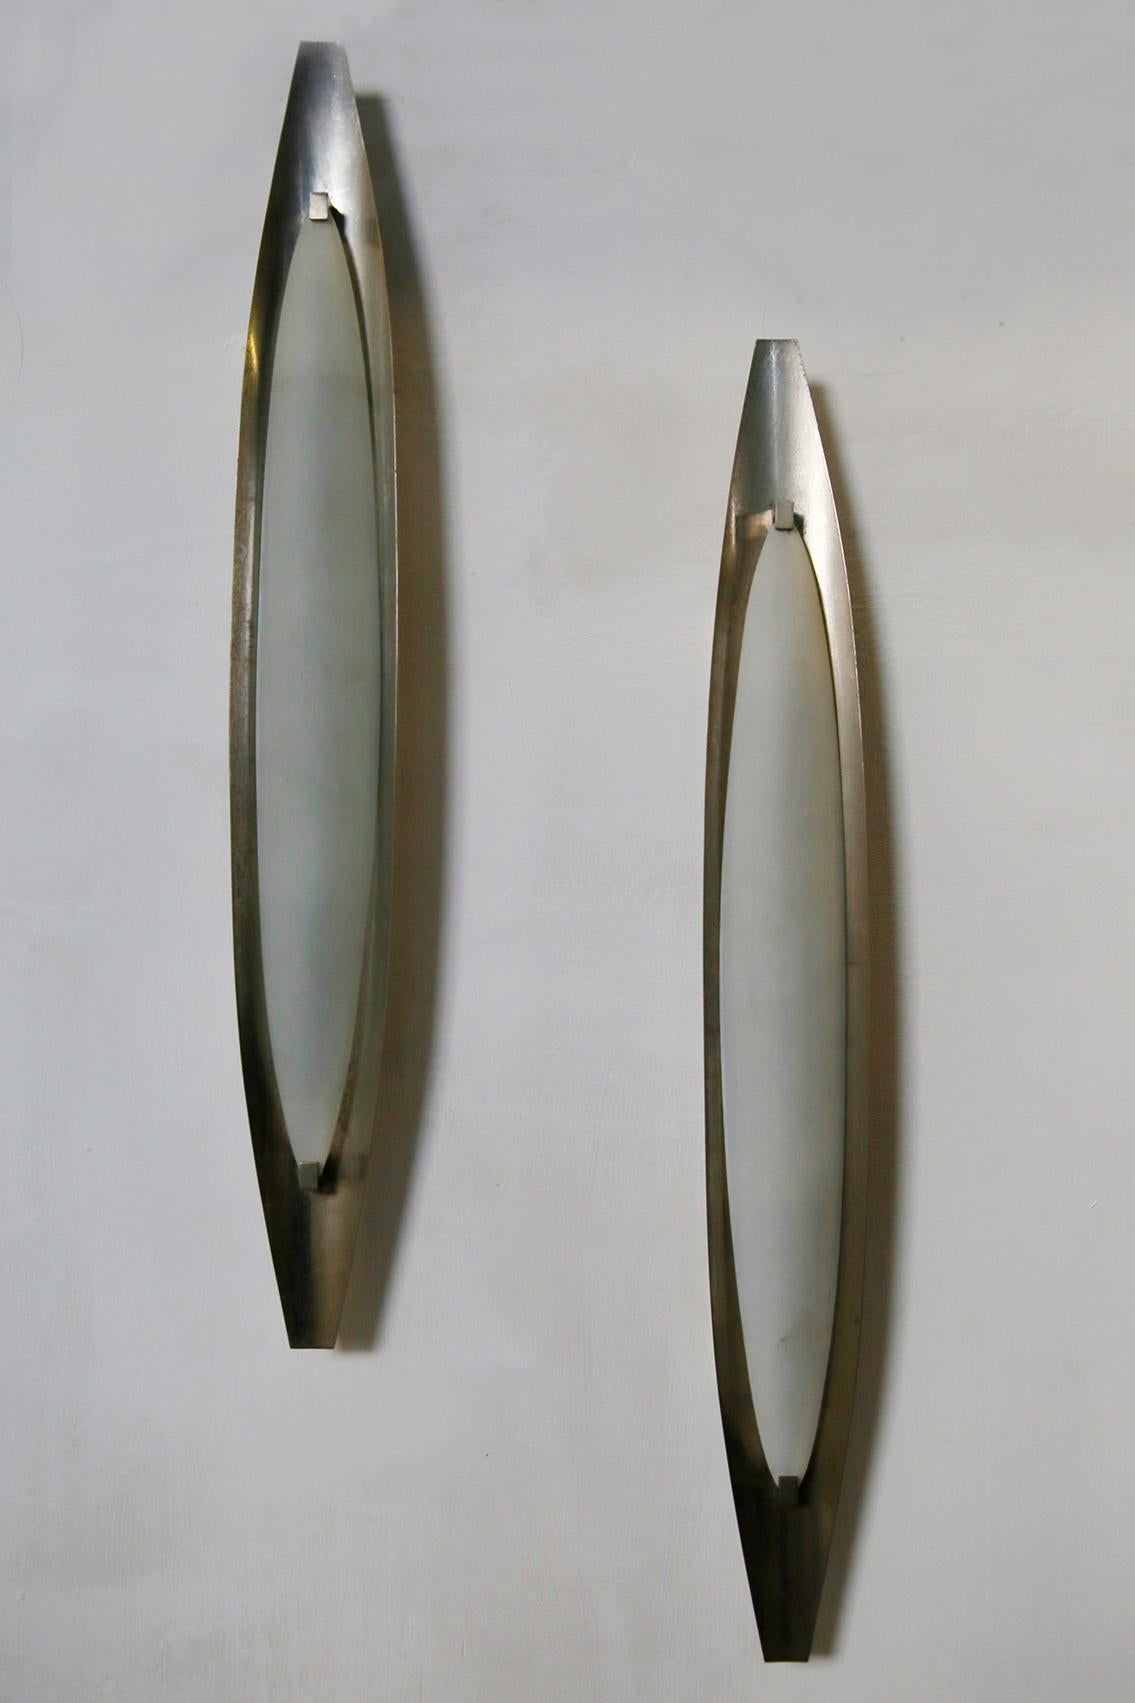 Pair of wall sconces designed by Max Ingrand for Fontana Arte in 1950s. The wall sconces are made of nickel-plated brass with an elongated oval shape. While the lampshade is made of opaline glass. 
The wall sconces are in very good condition very